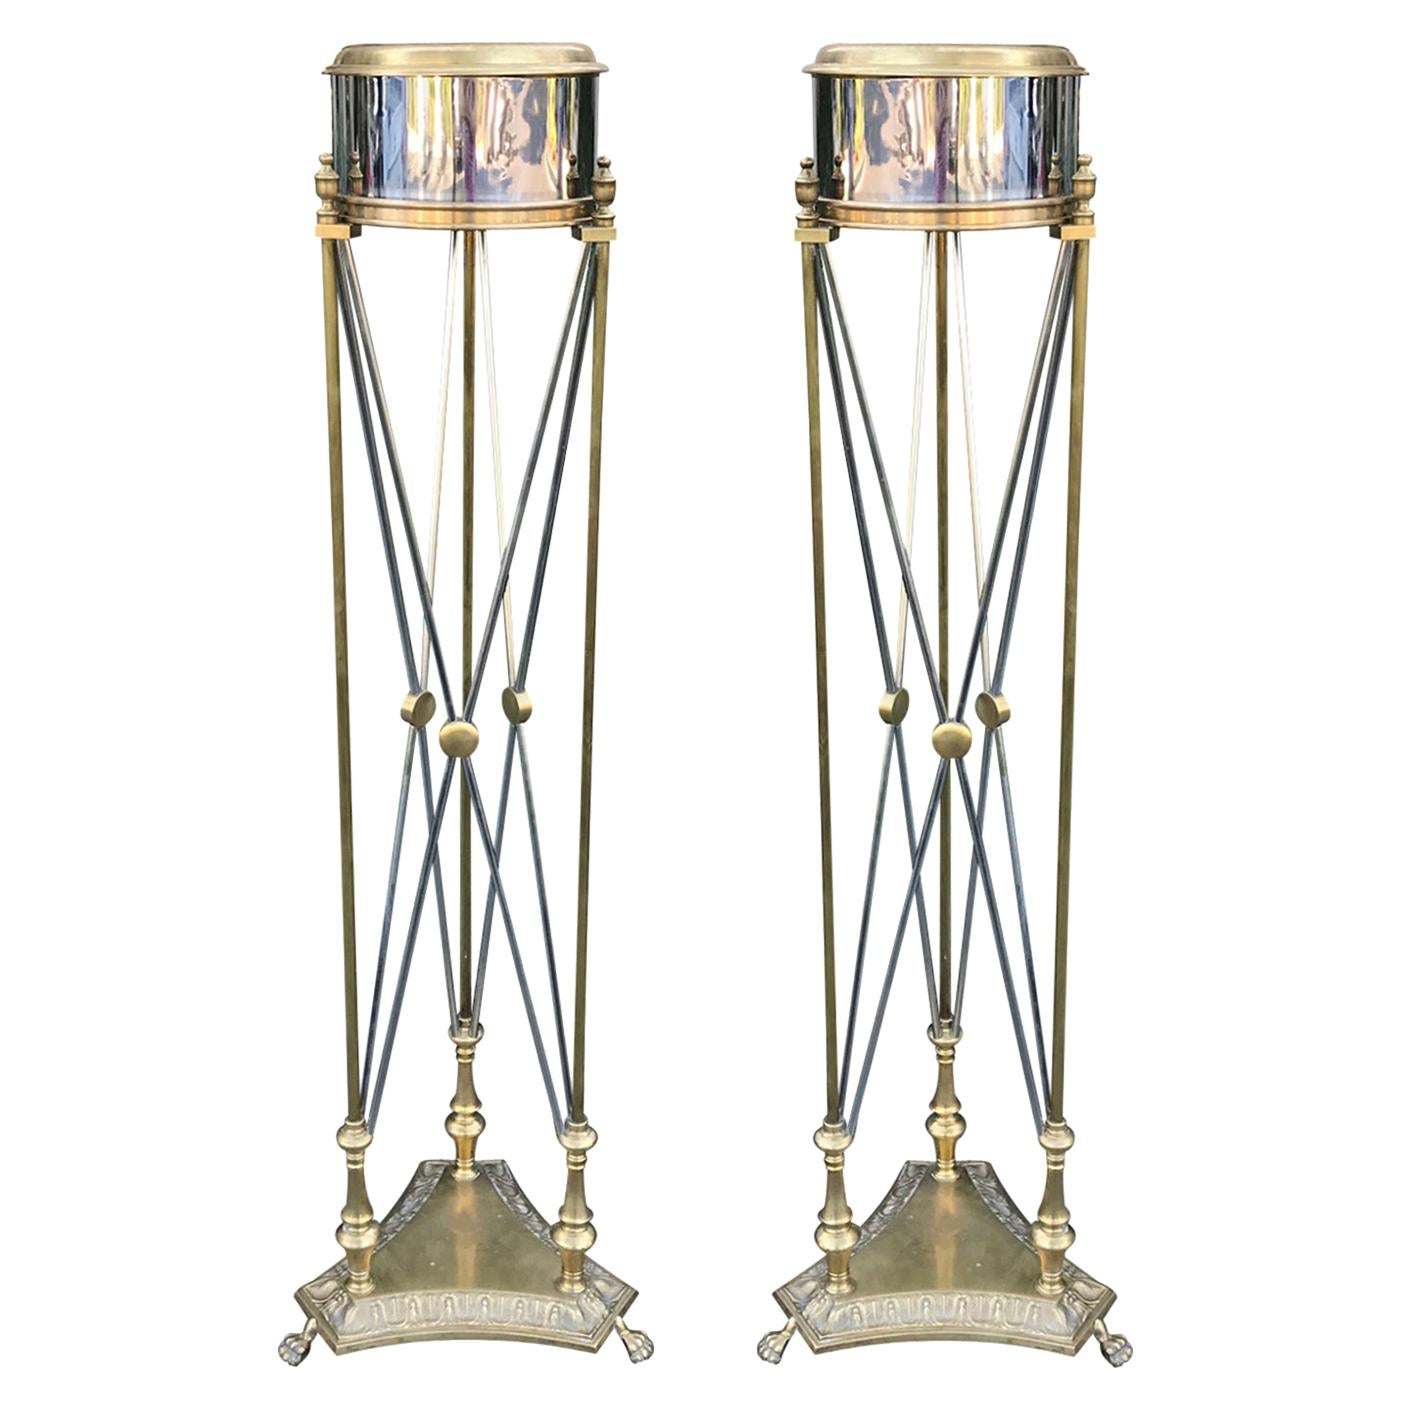 Attributed to Maison Jansen Pair of Steel and Brass Torchères or Plant Stands